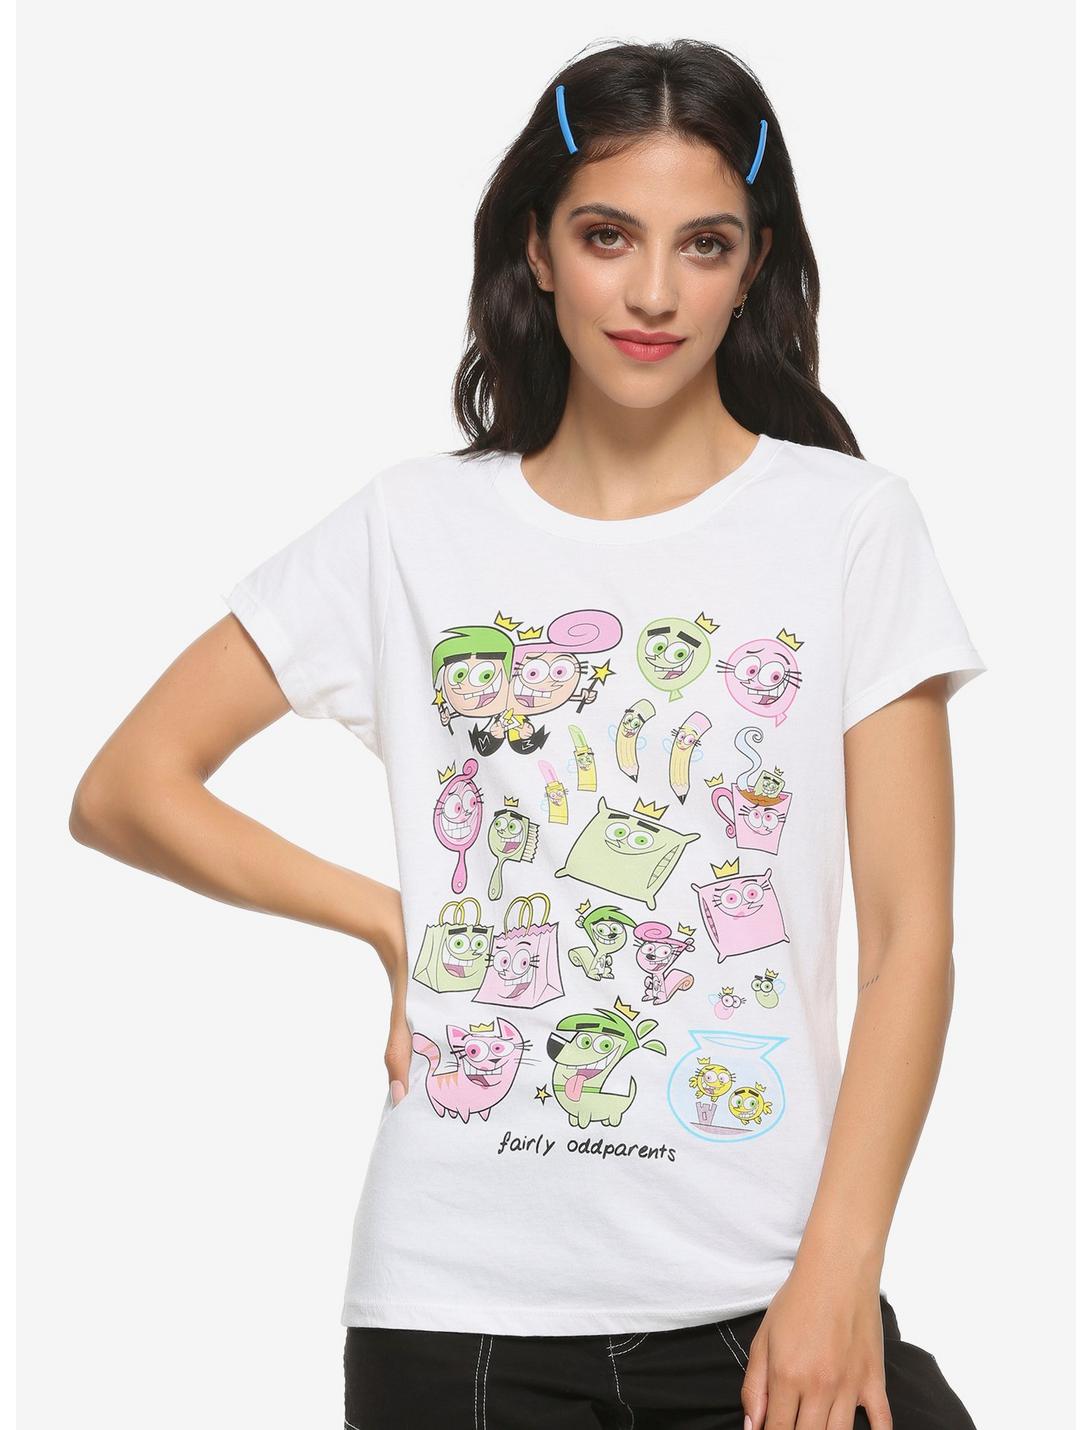 The Fairly Oddparents All Shapes & Sizes Girls T-Shirt, MULTI, hi-res